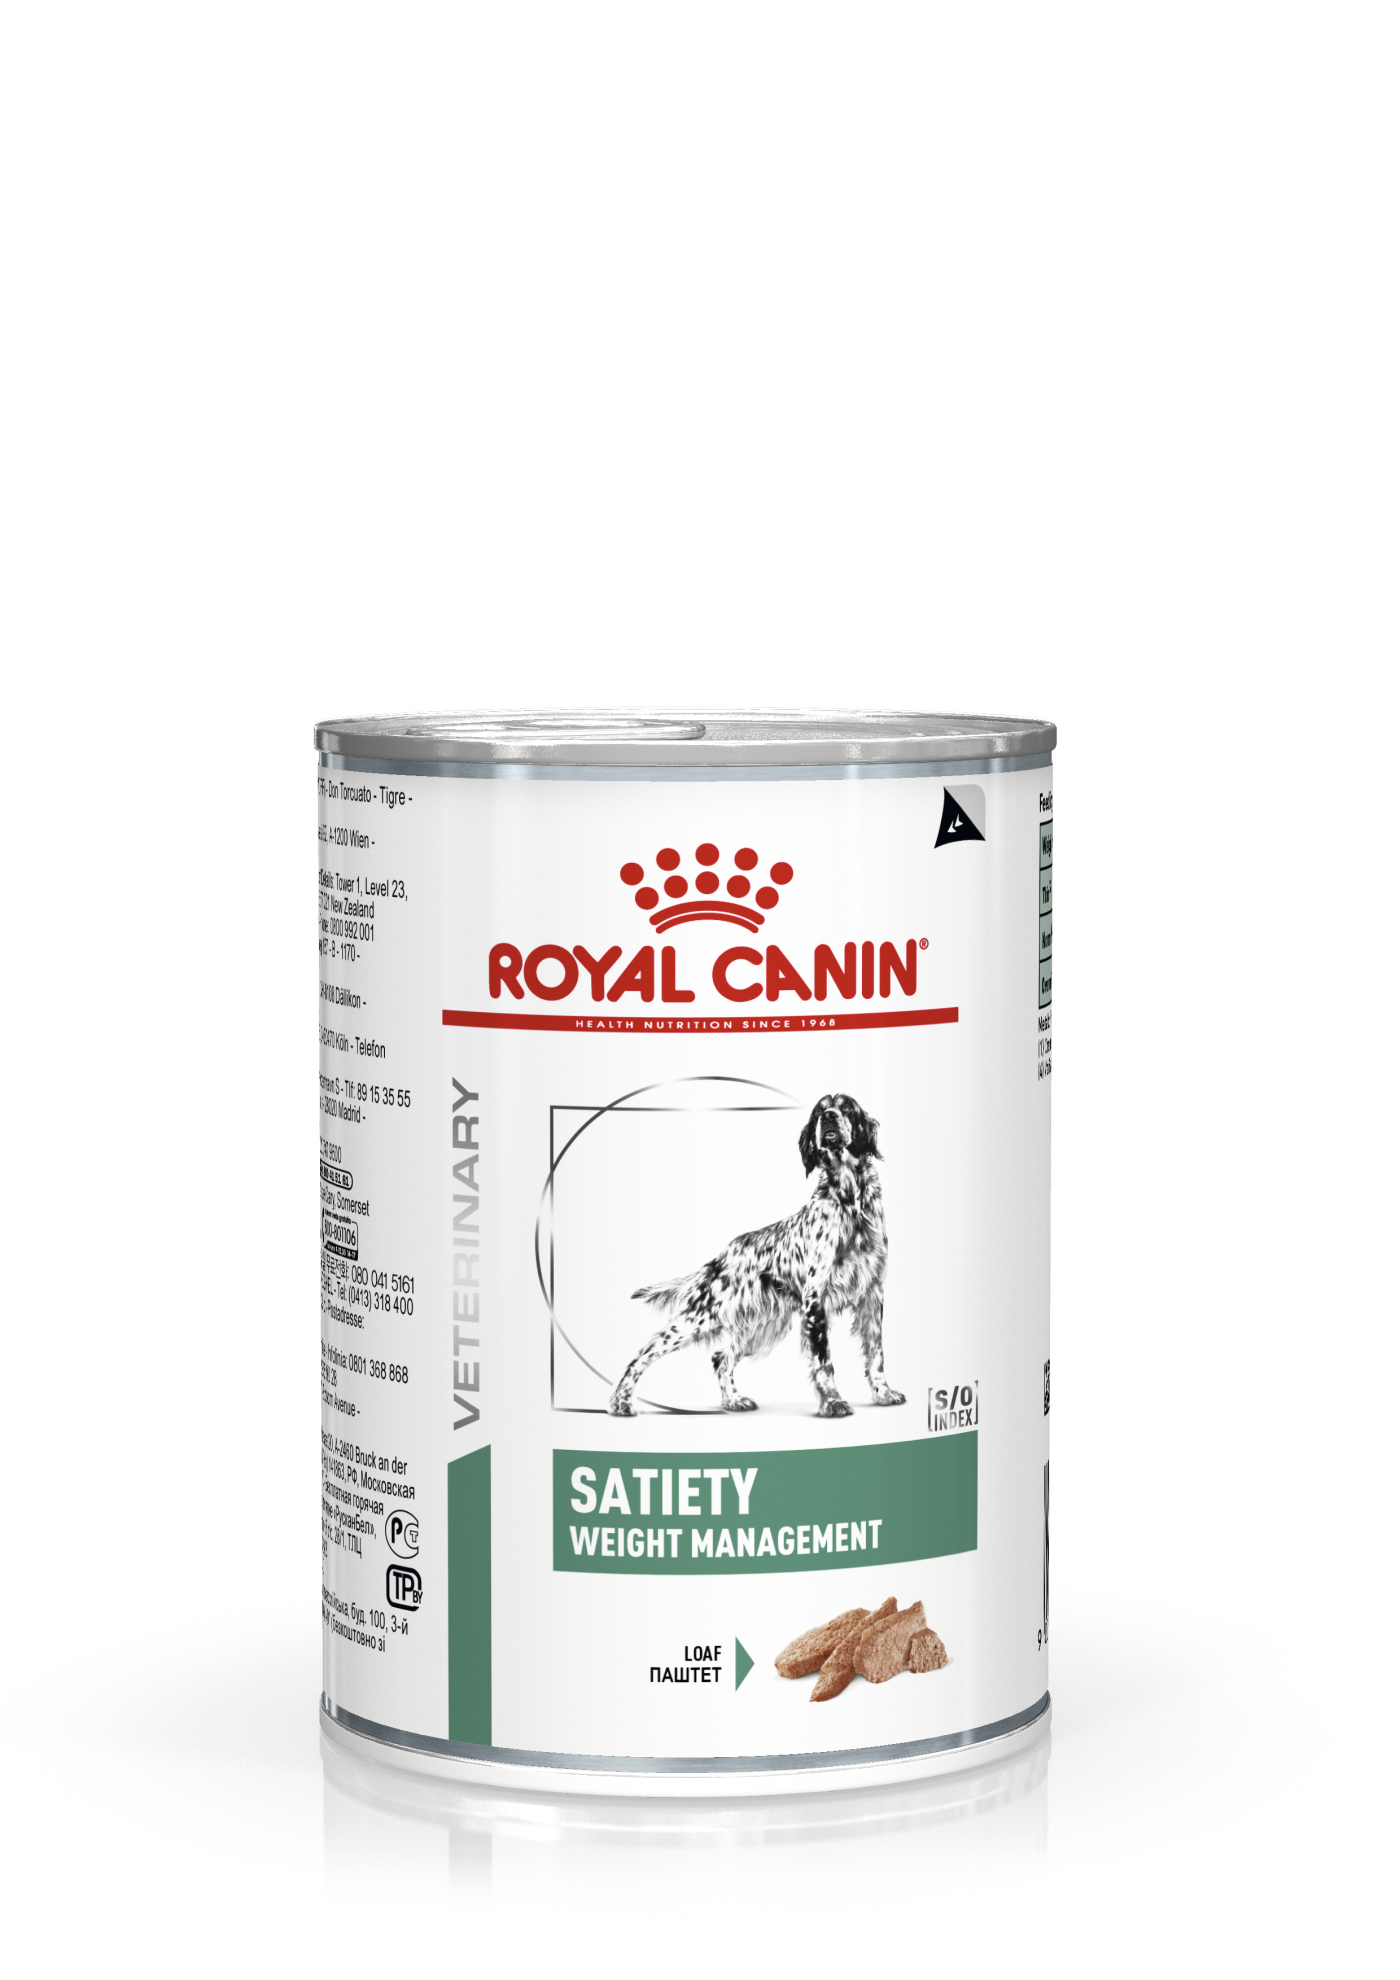 royal canin satiety small dog 8kg